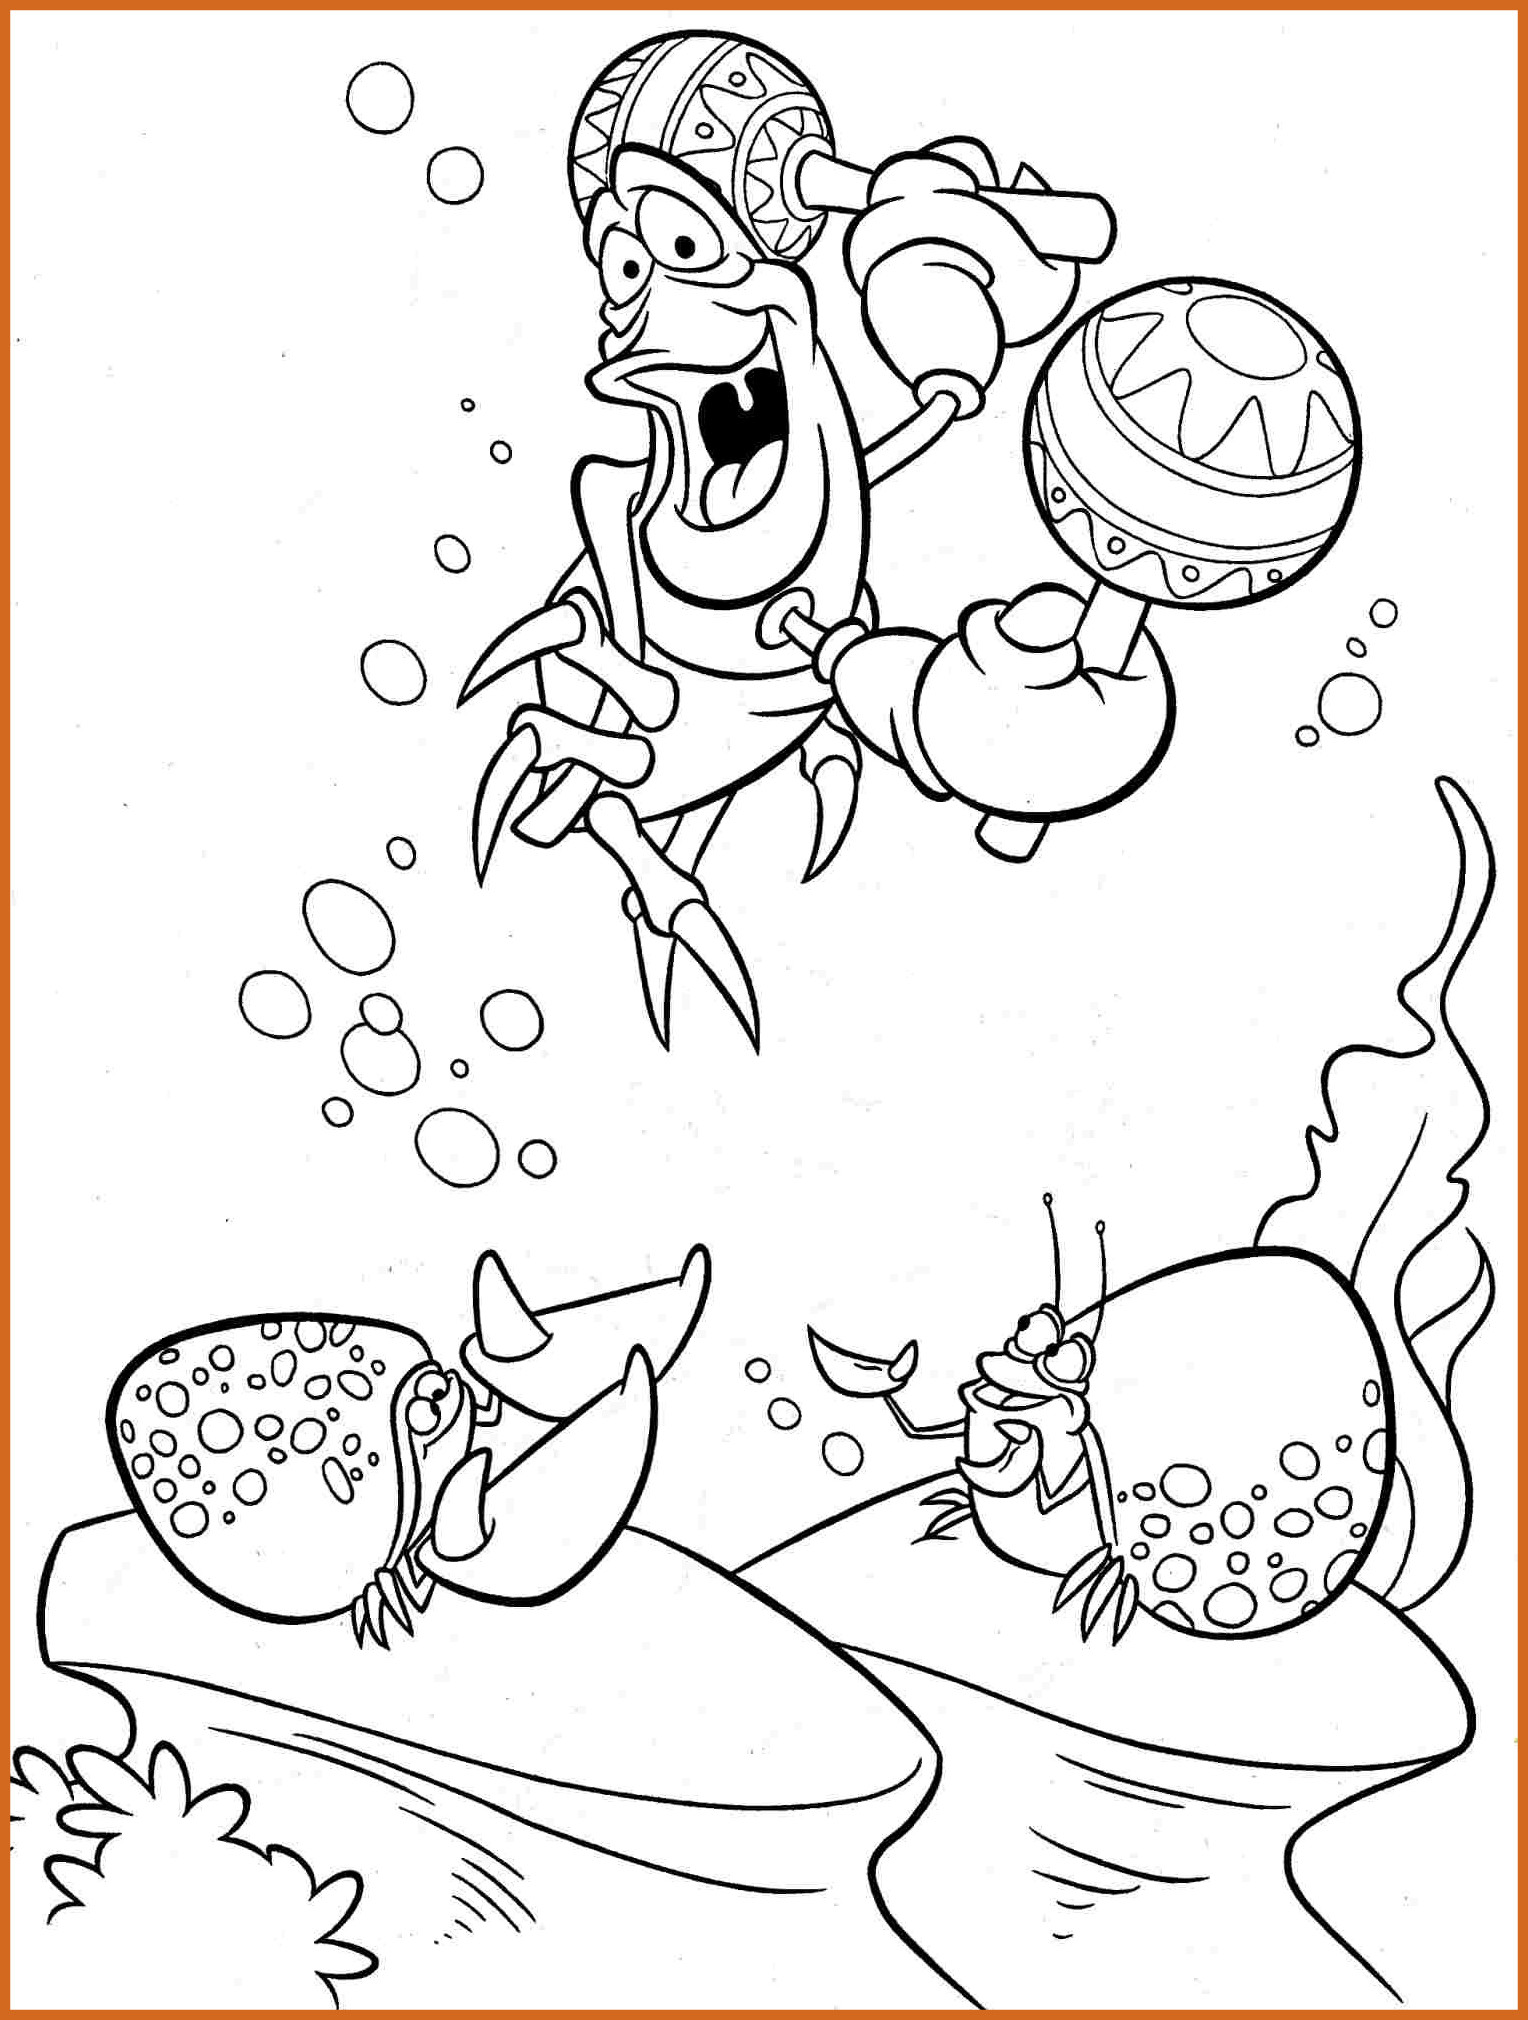 ariel-the-little-mermaid-coloring-pages-at-getcolorings-free